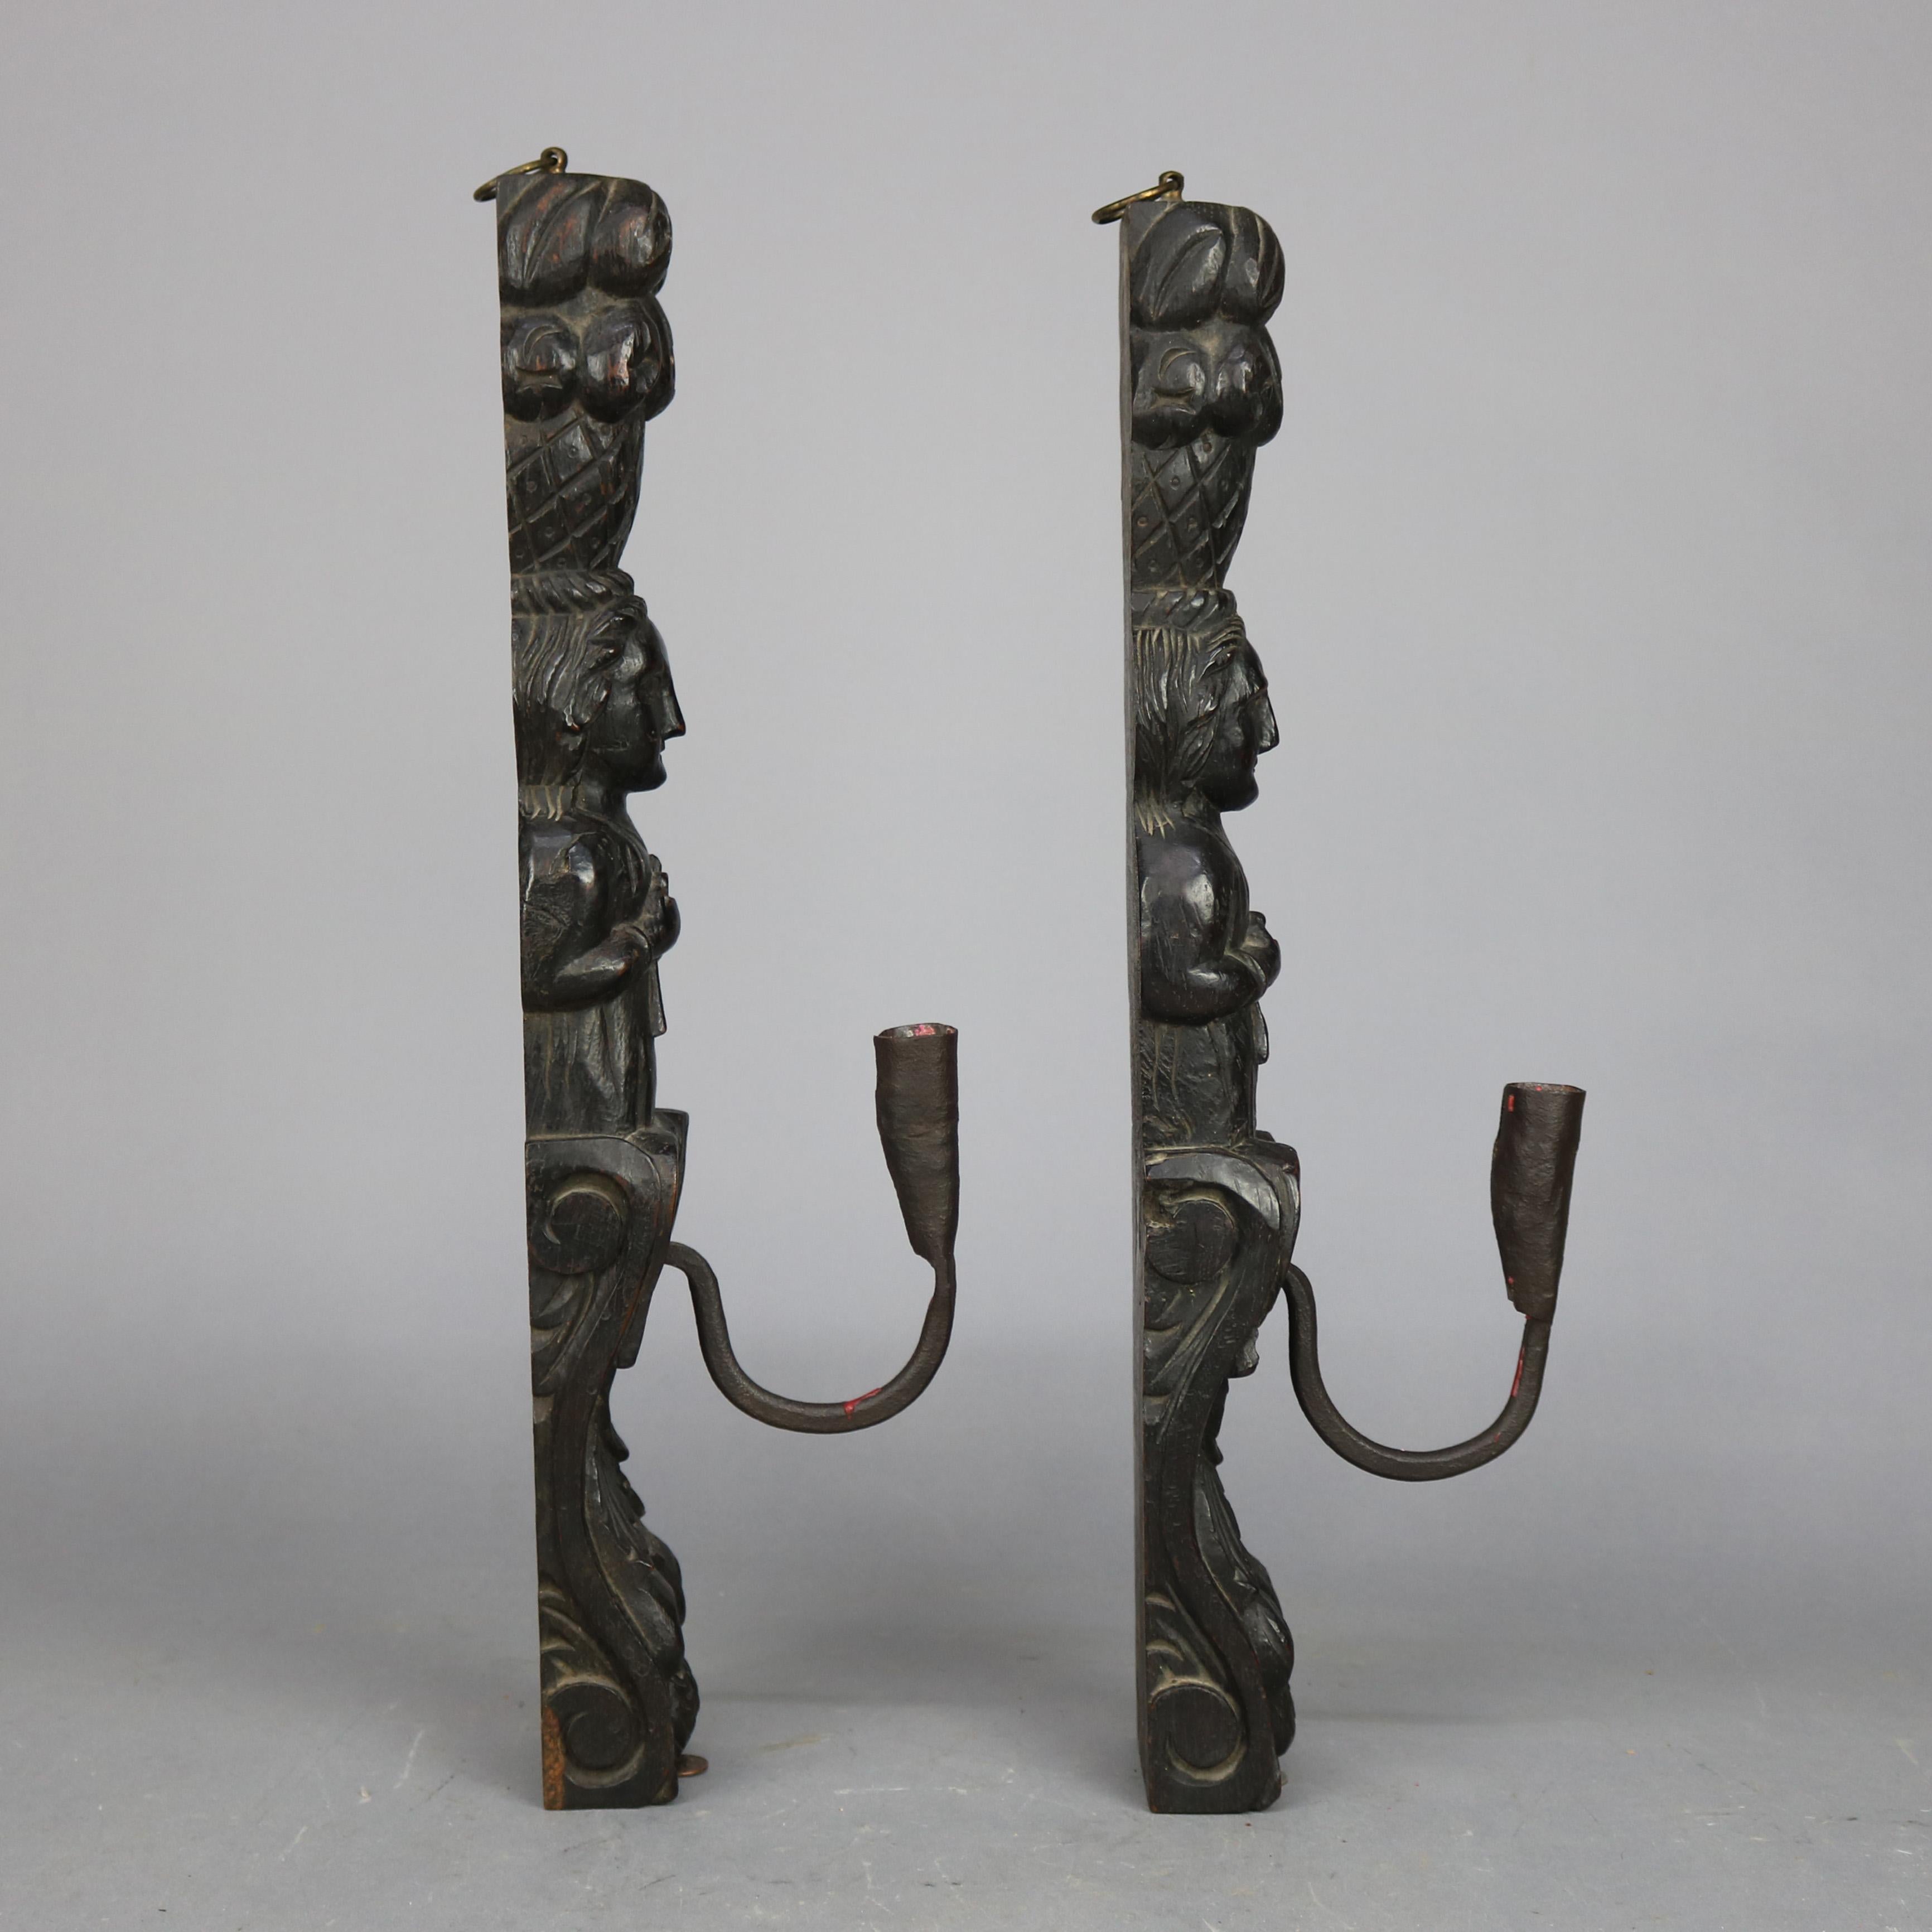 Wrought Iron Early Jacobean Tudor Figural Carved Oak & Handwrought Iron Wall Sconces